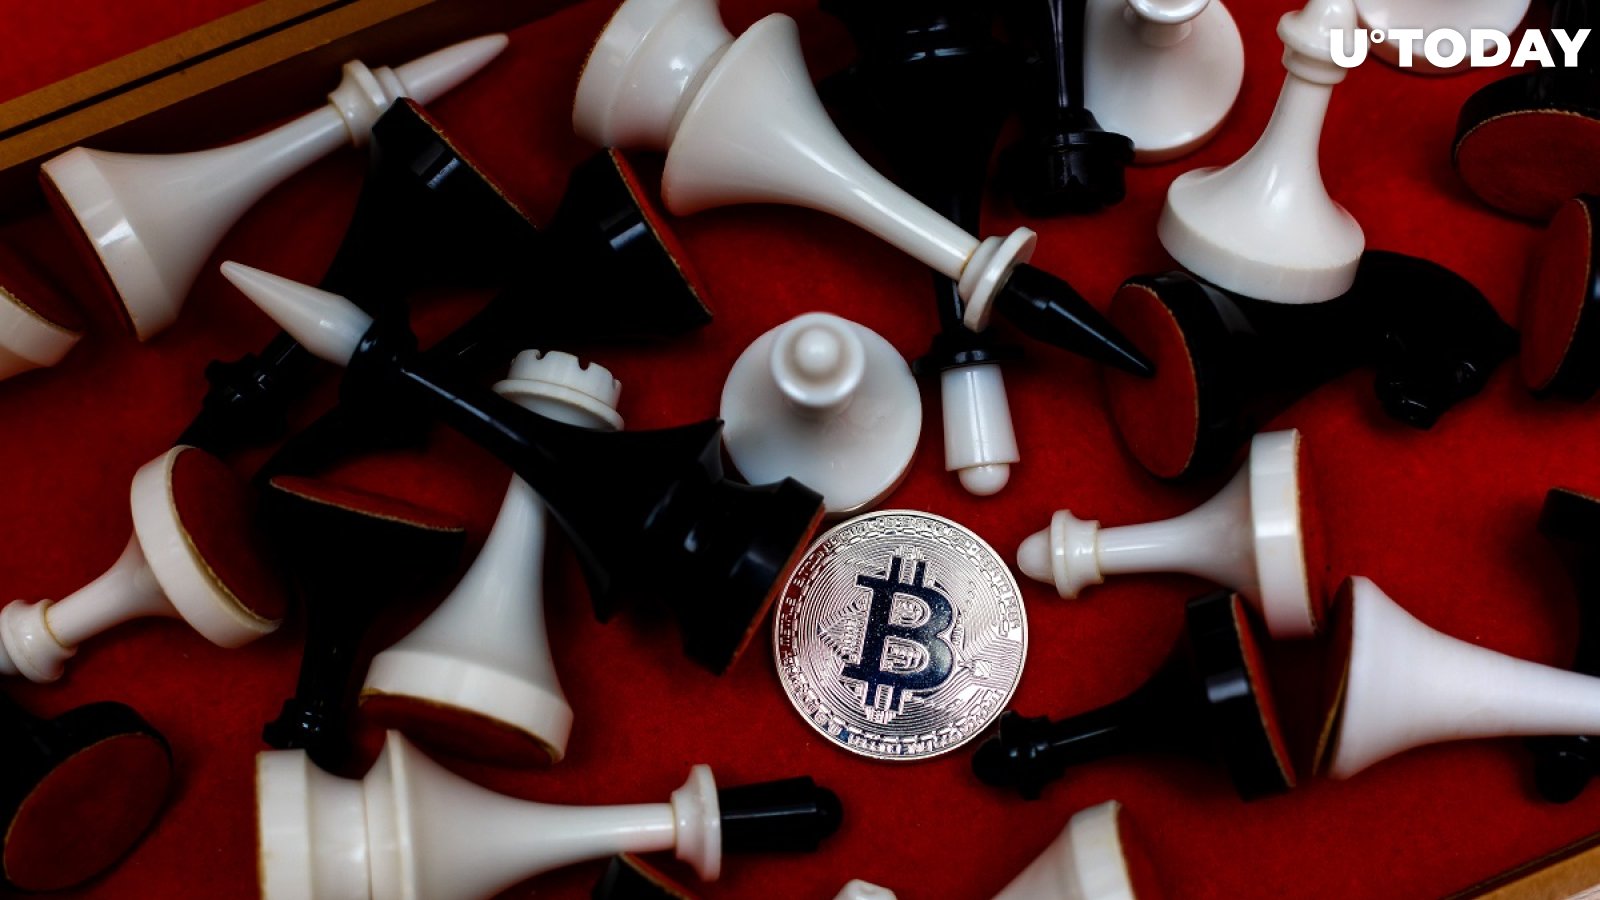 Bitcoin Dominance Is About to Collapse, According to Crypto Trader Scott Melker